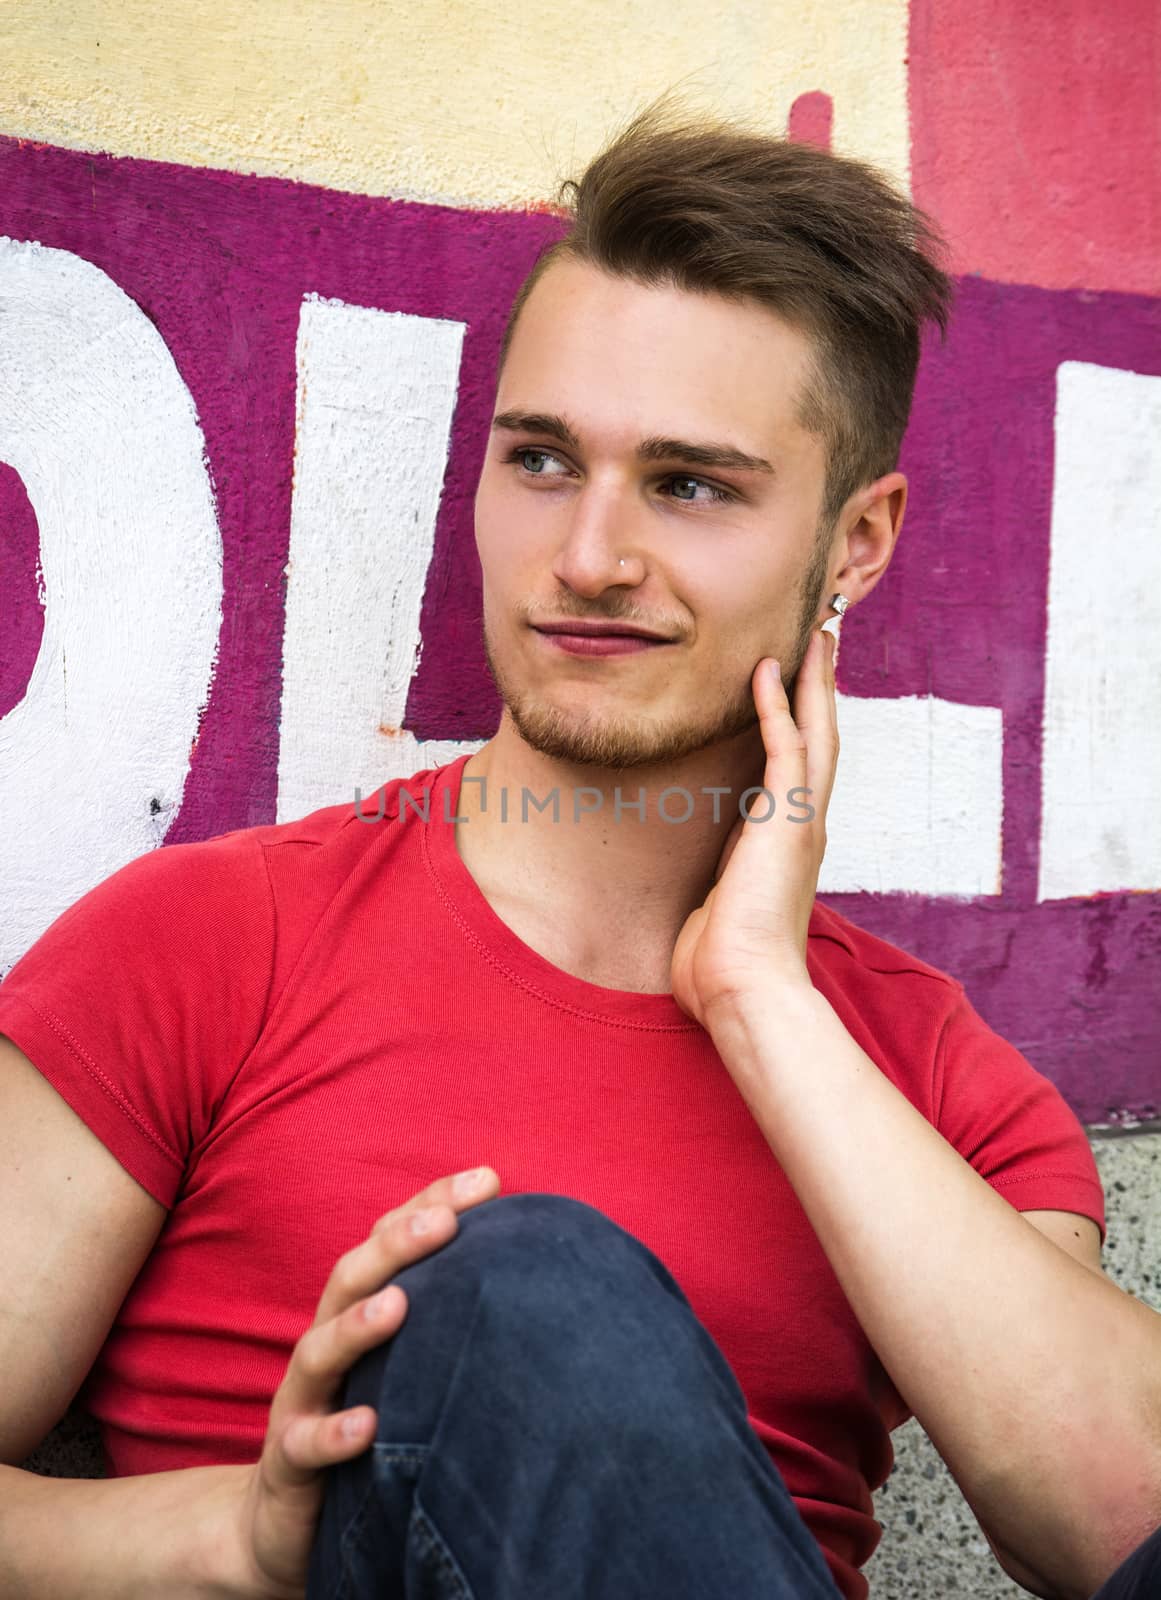 Handsome blond young man sitting against colorful graffiti wall looking away with a smile